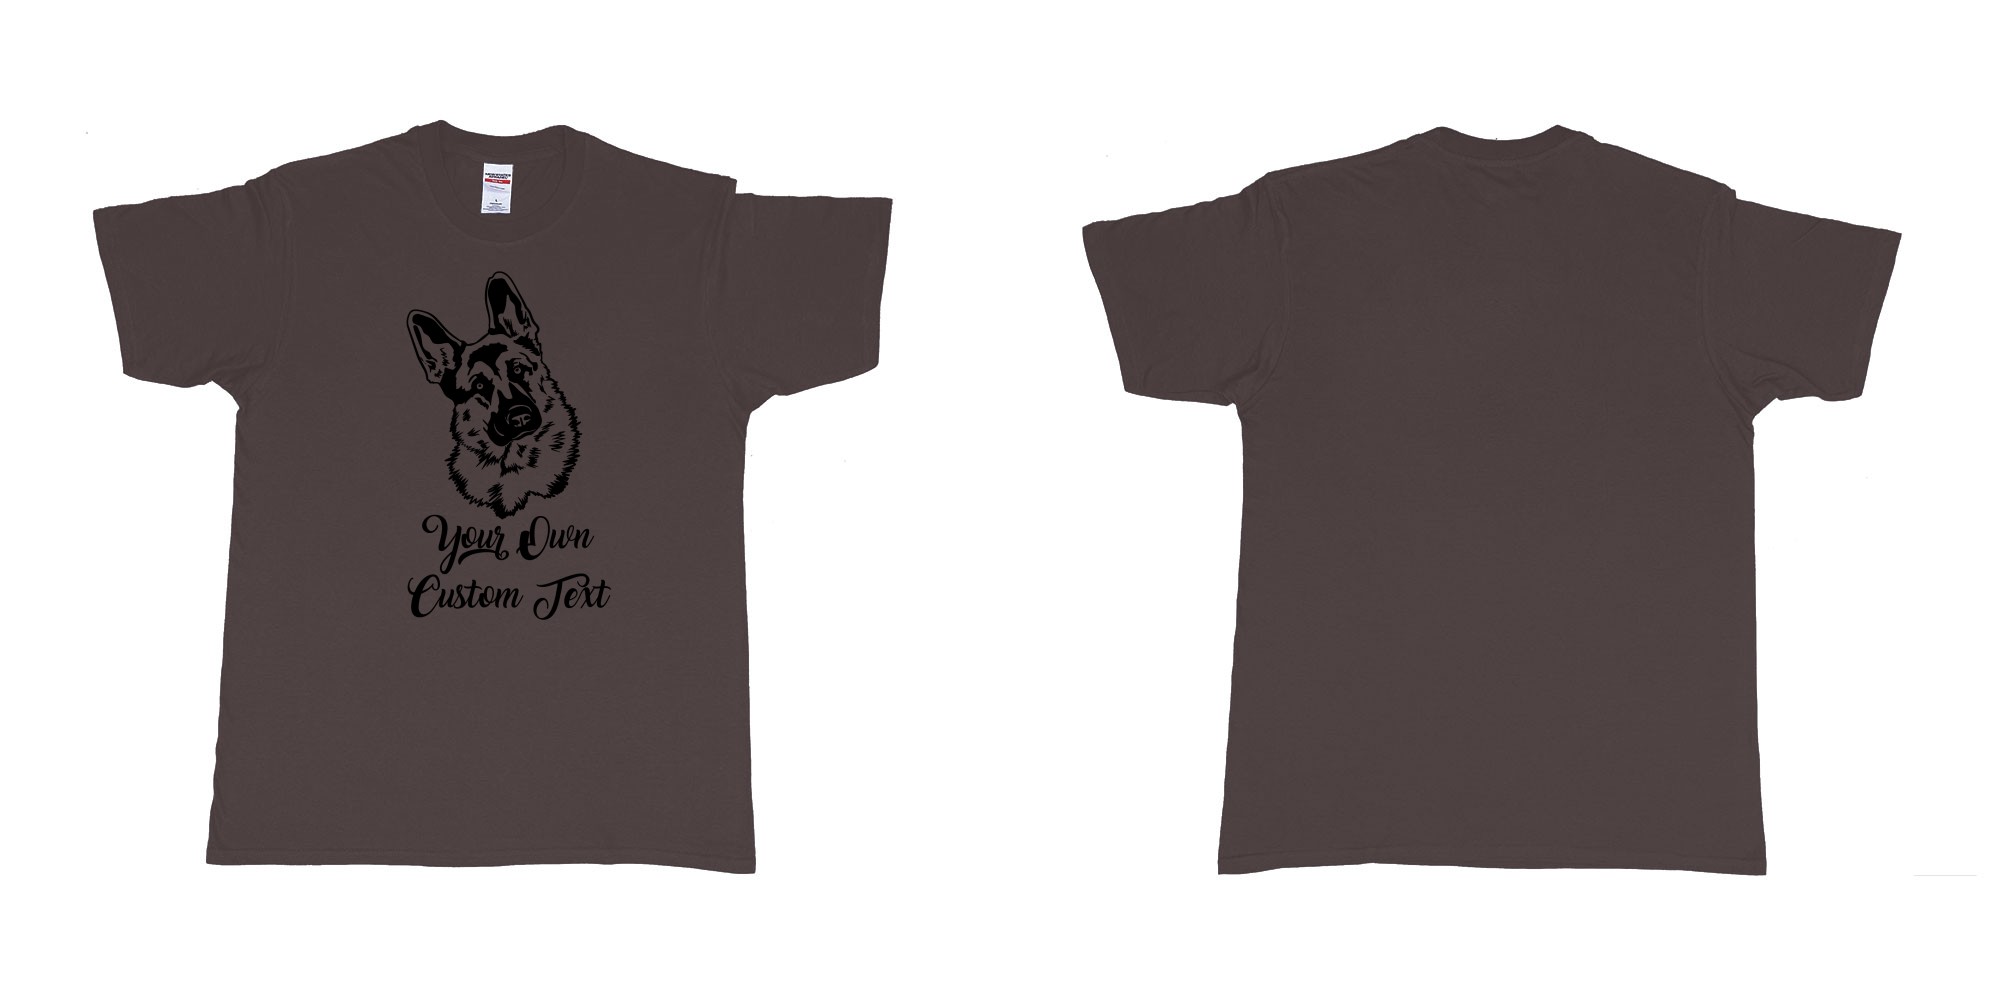 Custom tshirt design zack german shepherd tilts its head your own custom text in fabric color dark-chocolate choice your own text made in Bali by The Pirate Way